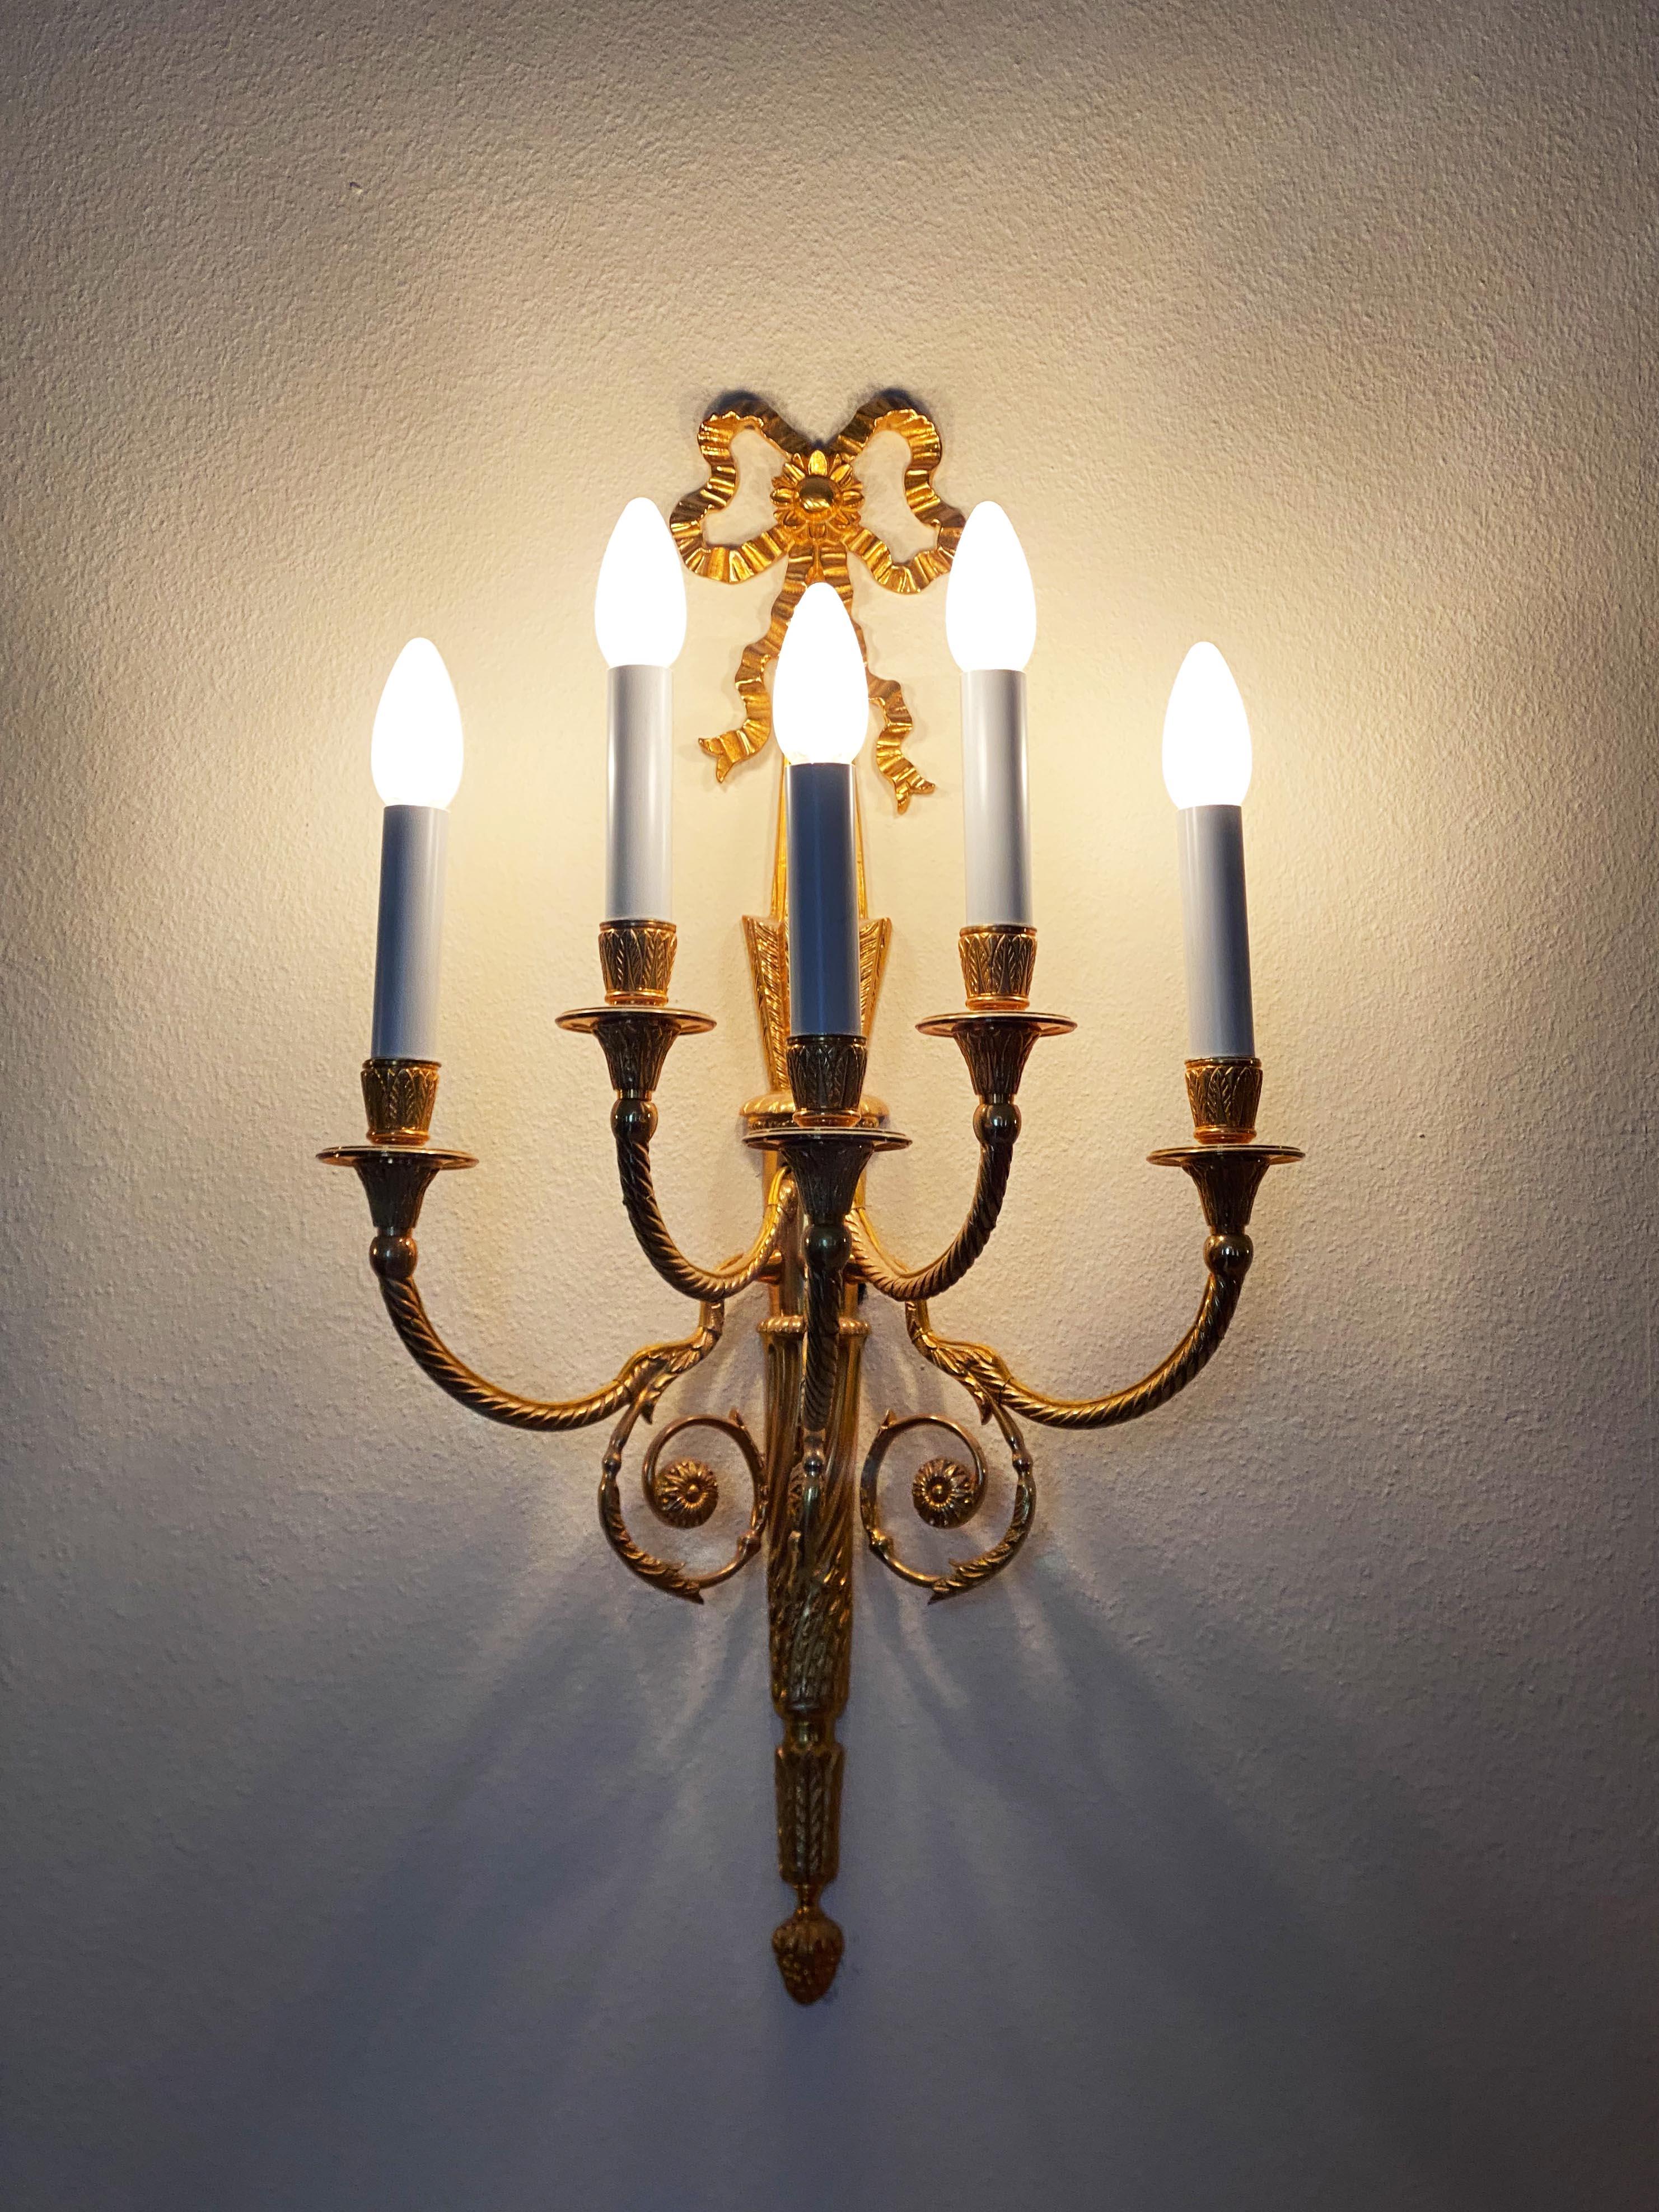 Gilded bronze wall lamp, sconce with 5 arms fitted each with E14 socket. Made in the shape of a torch with a large mesh and  acanthus leaves decor. Made about 1890 in France. up to 4 pieces available price per lamp.
